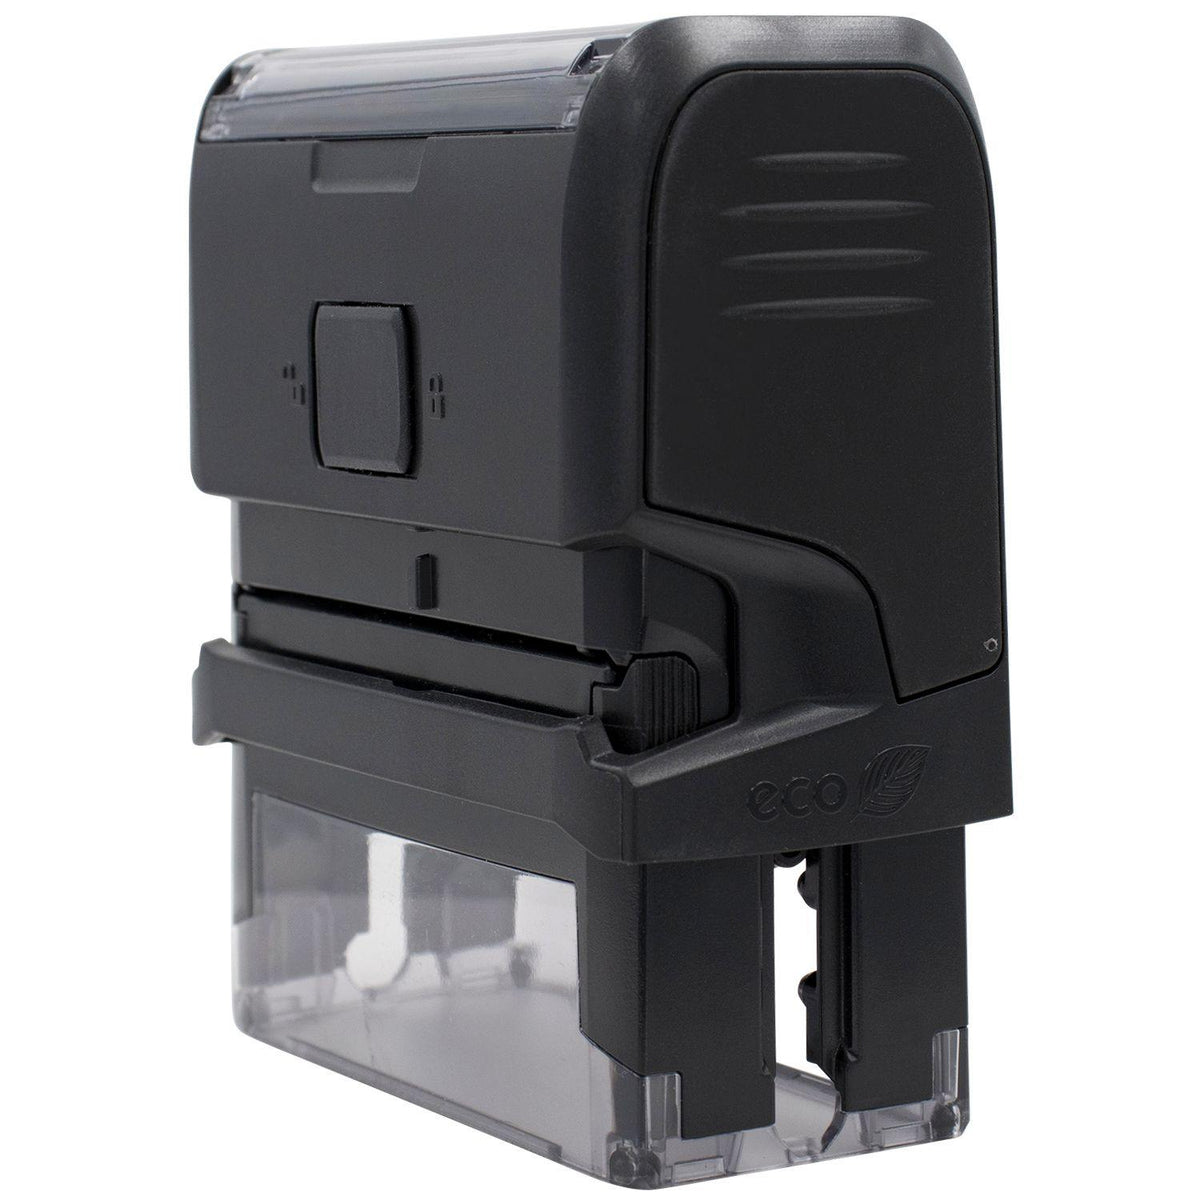 Large Self-Inking Postage Due Stamp - Engineer Seal Stamps - Brand_Trodat, Impression Size_Large, Stamp Type_Self-Inking Stamp, Type of Use_General, Type of Use_Office, Type of Use_Postal &amp; Mailing